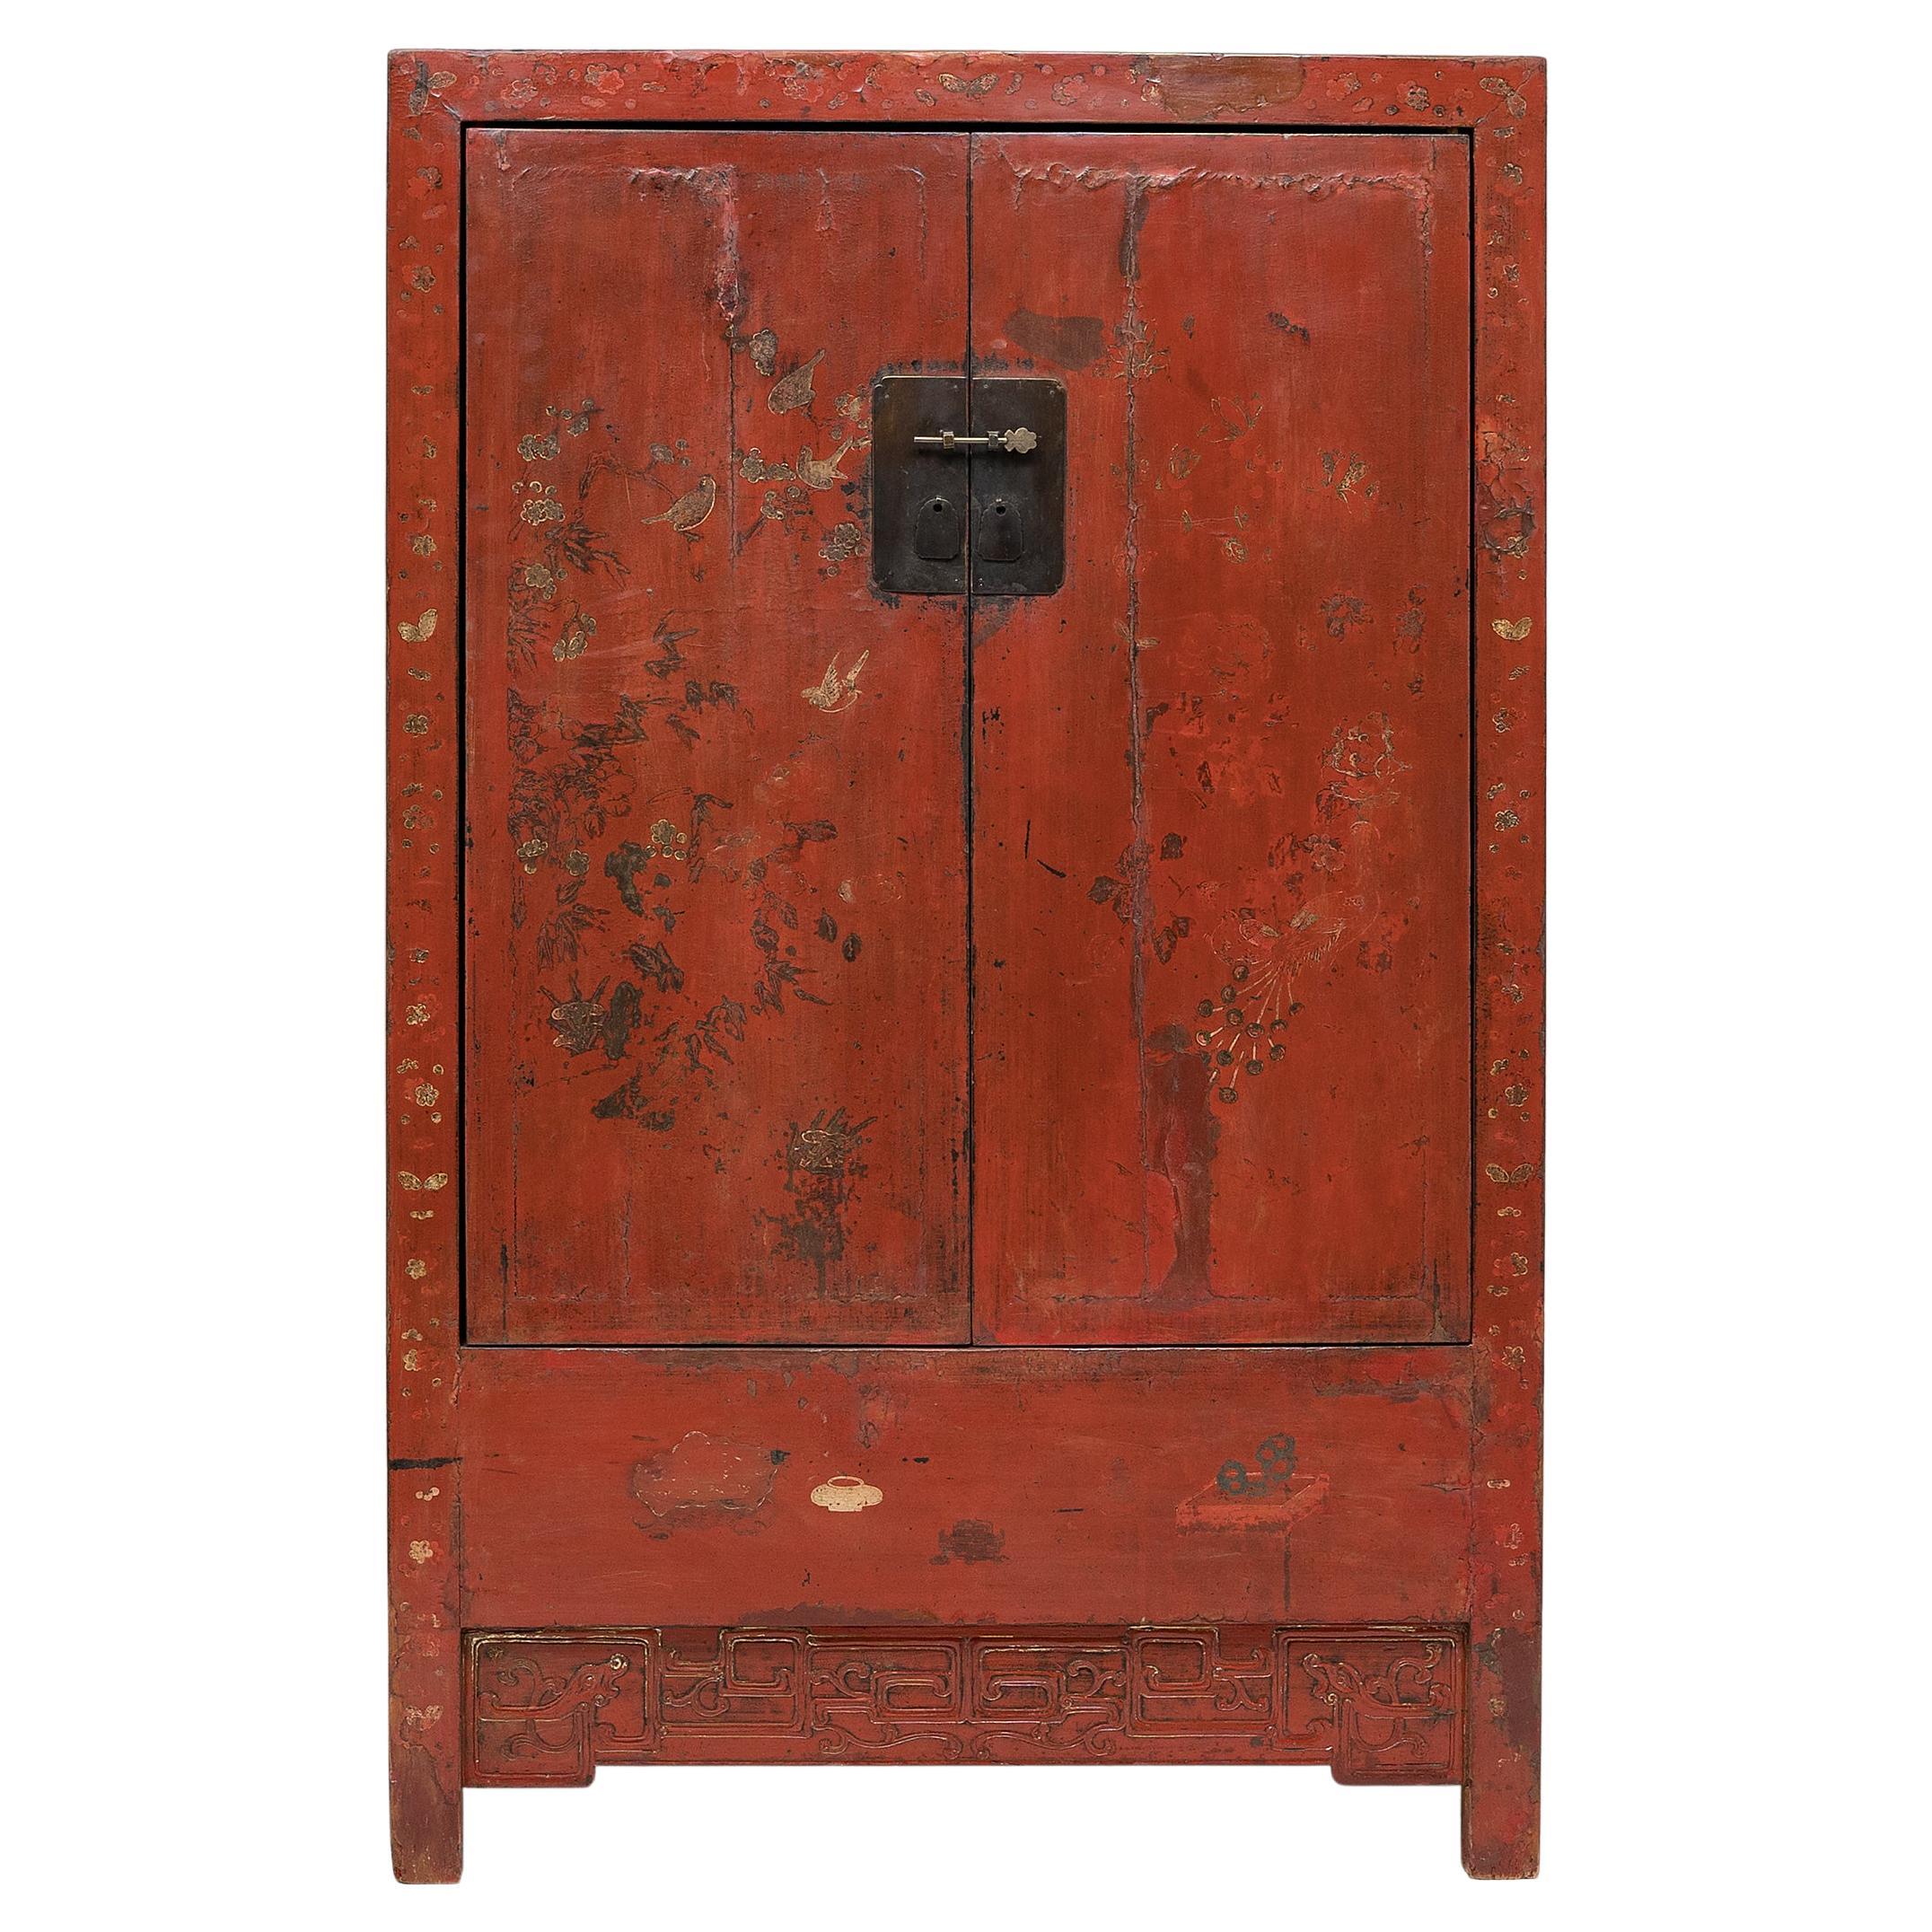 Painted Chinese Red Lacquer Wedding Cabinet, c. 1850